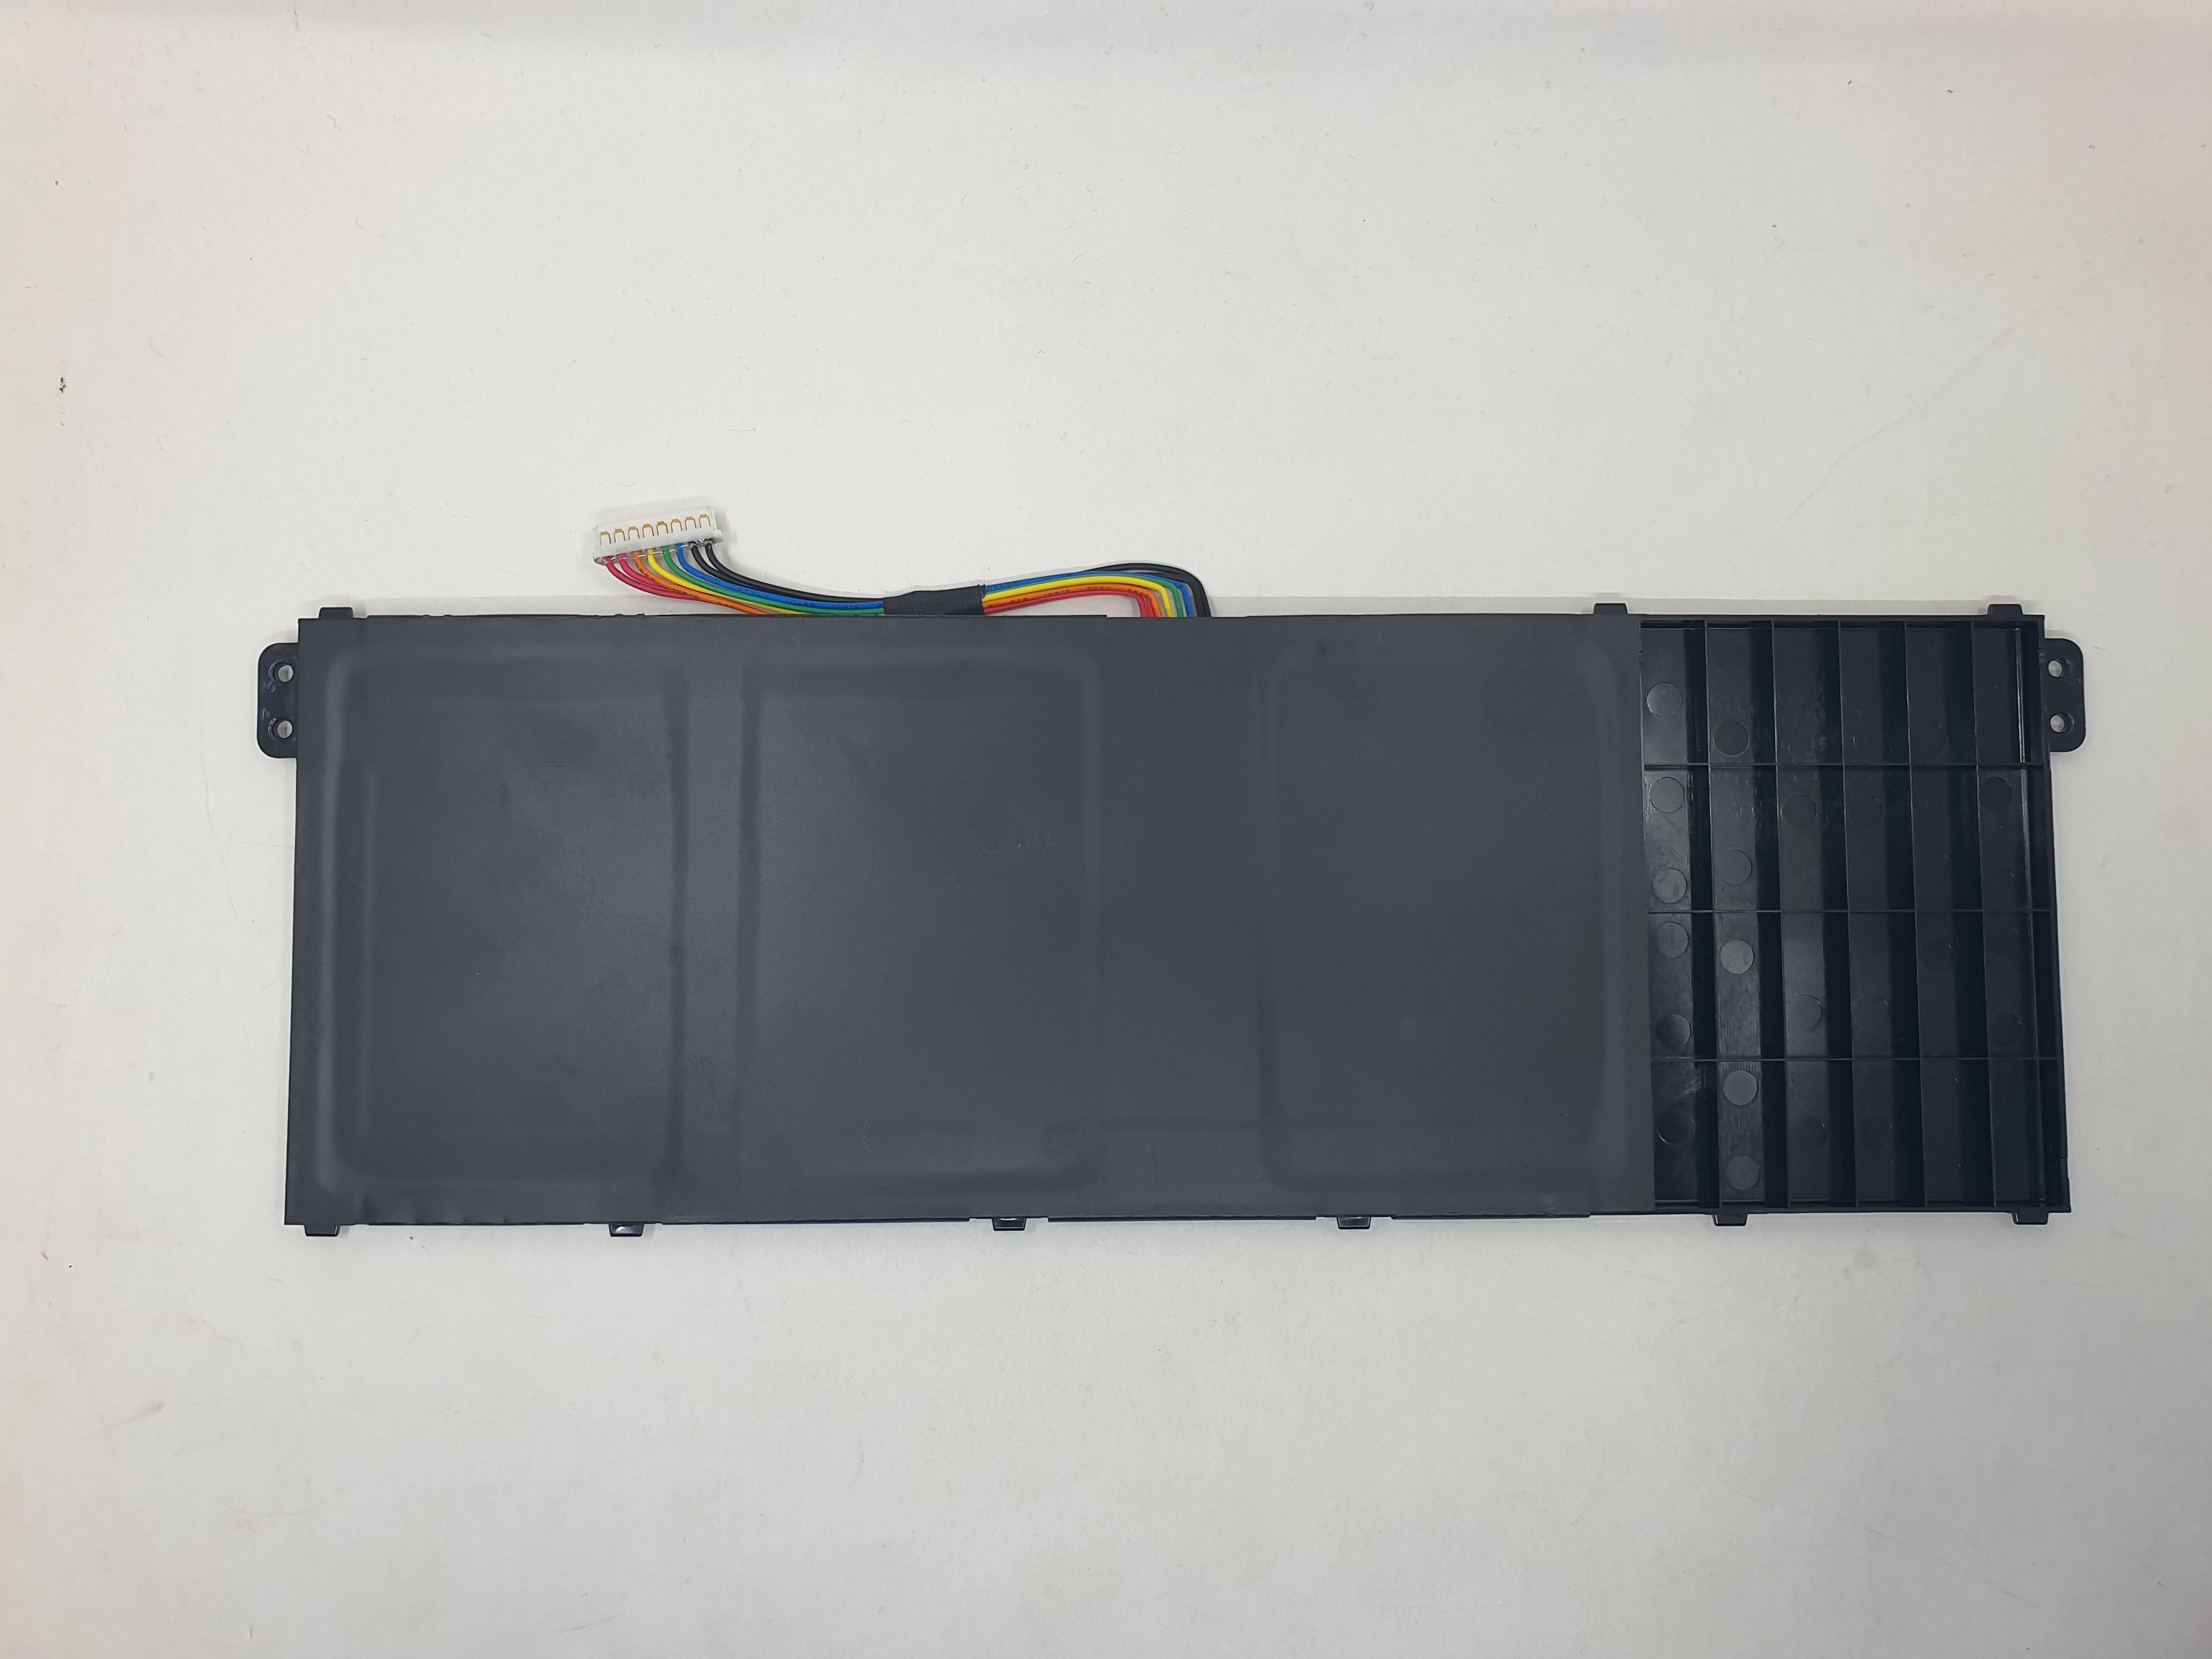 Acer Battery A315-56 A1 for Aspire 3 Intel - A315-56